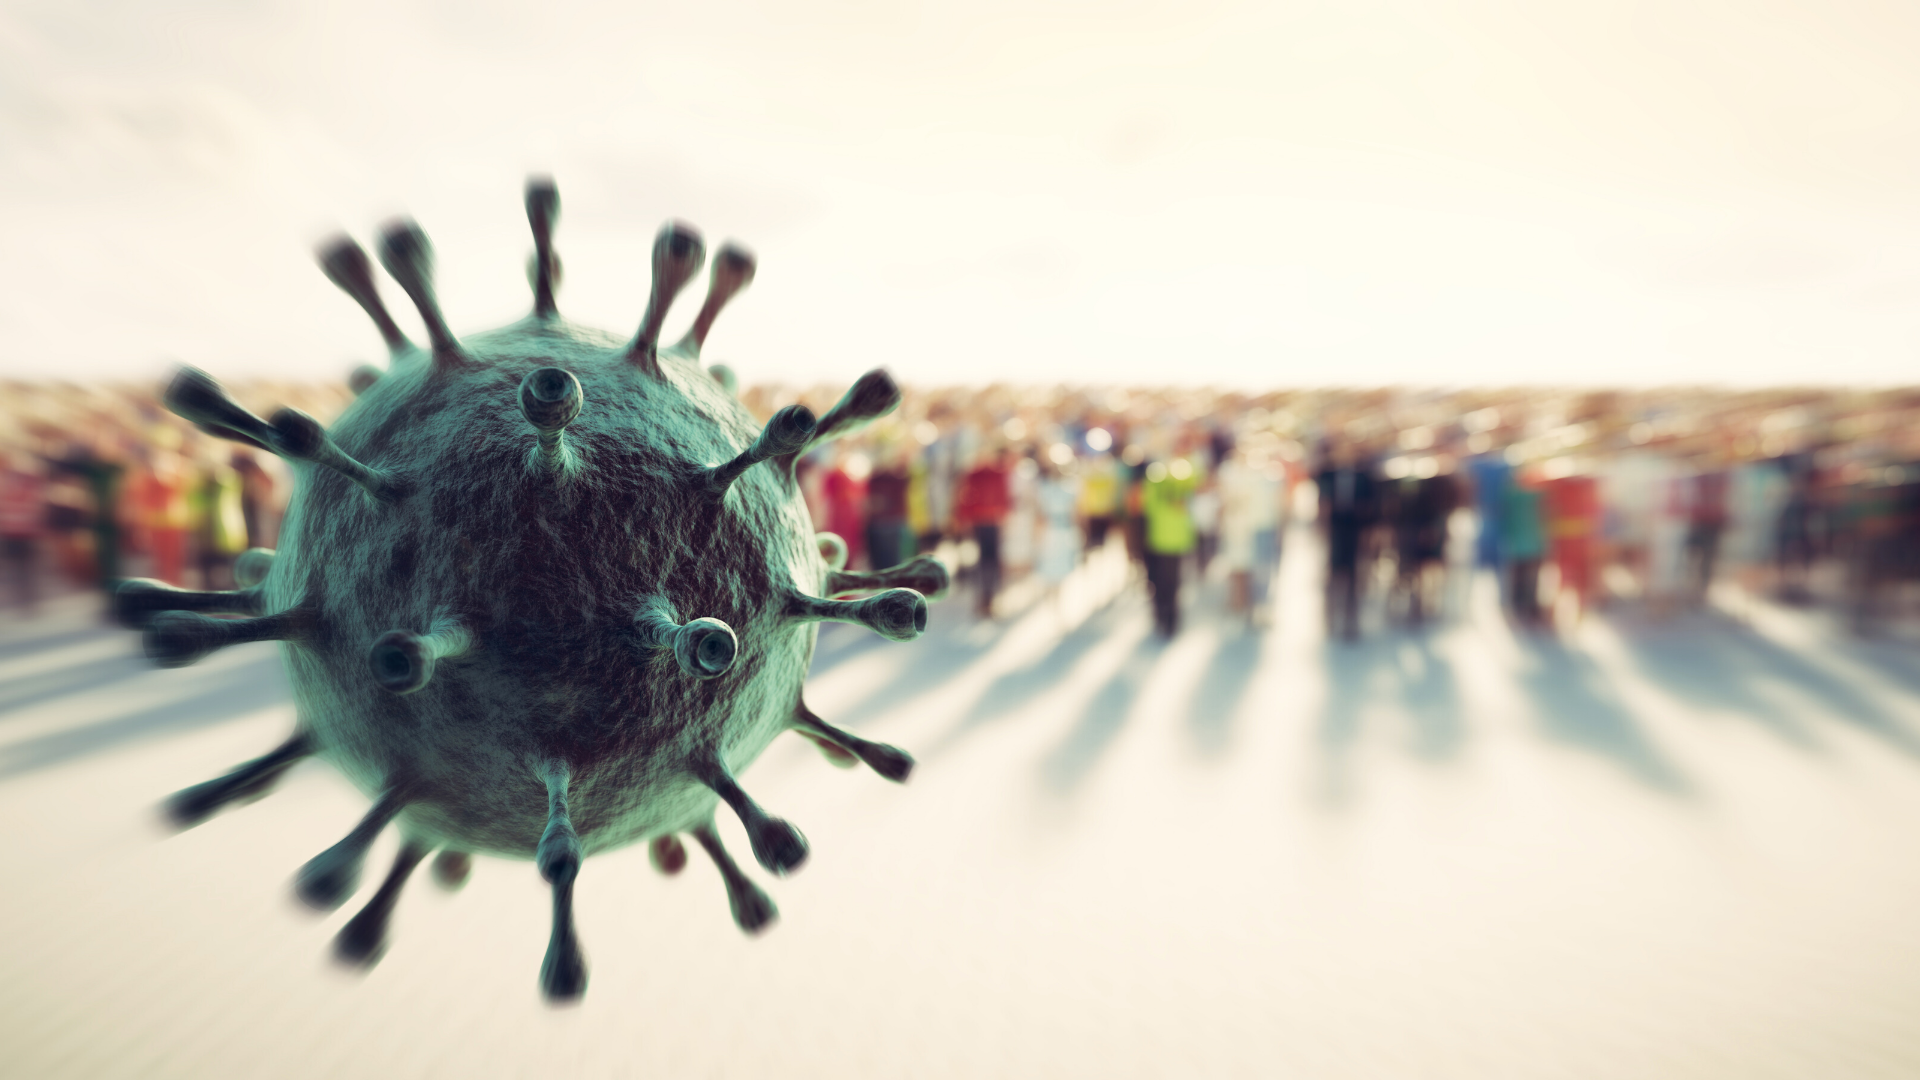 COVID-19 virus in front of a blurred crowd of people